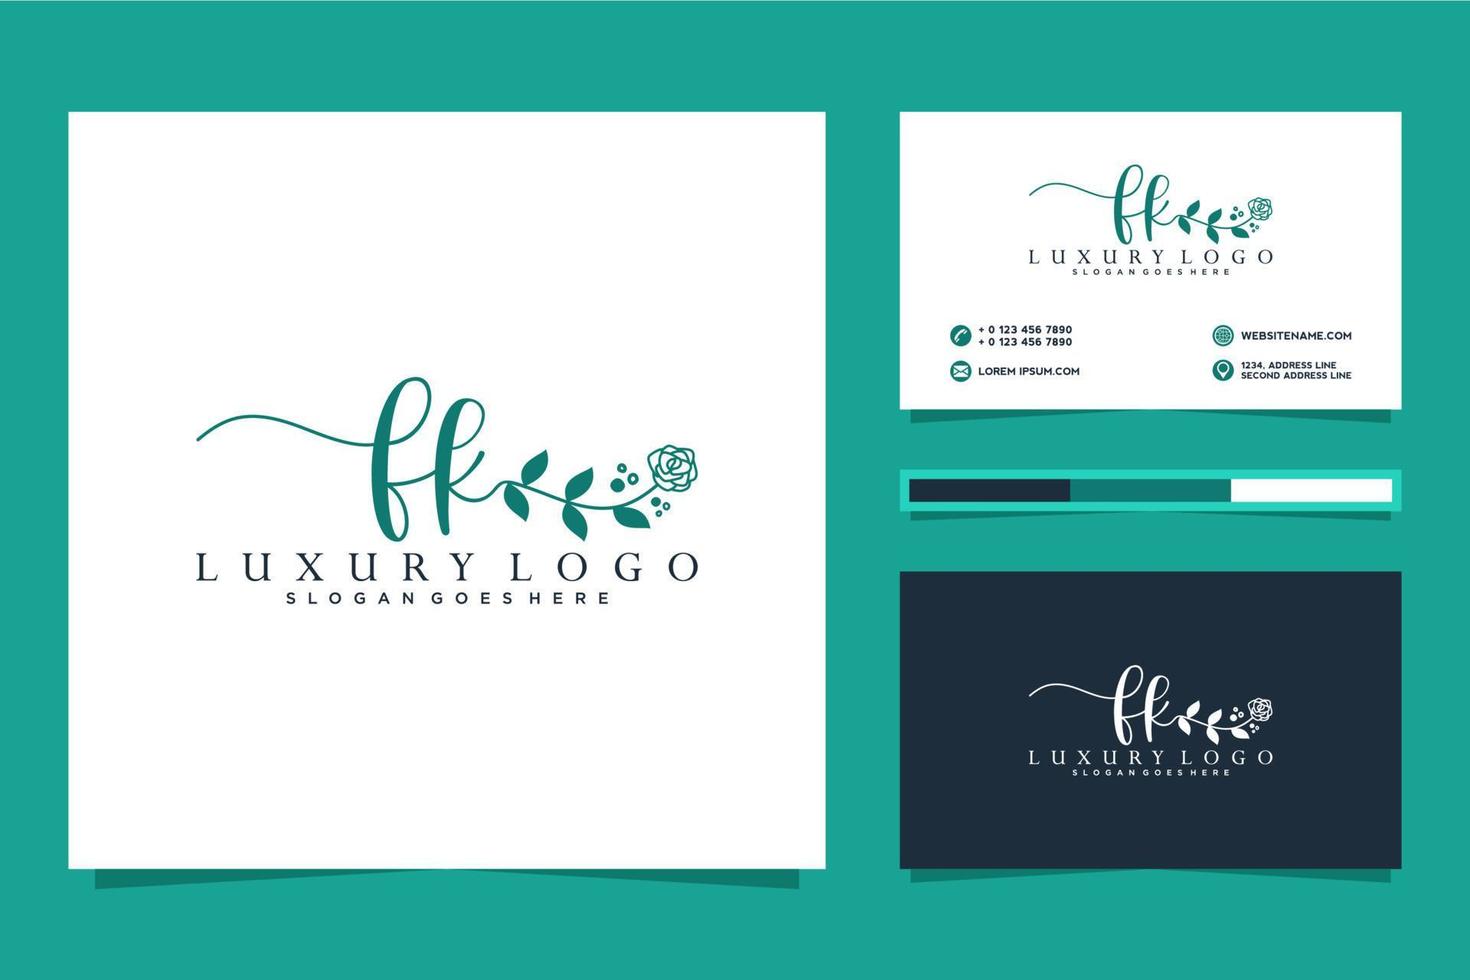 Initial FK Feminine logo collections and business card templat Premium Vector